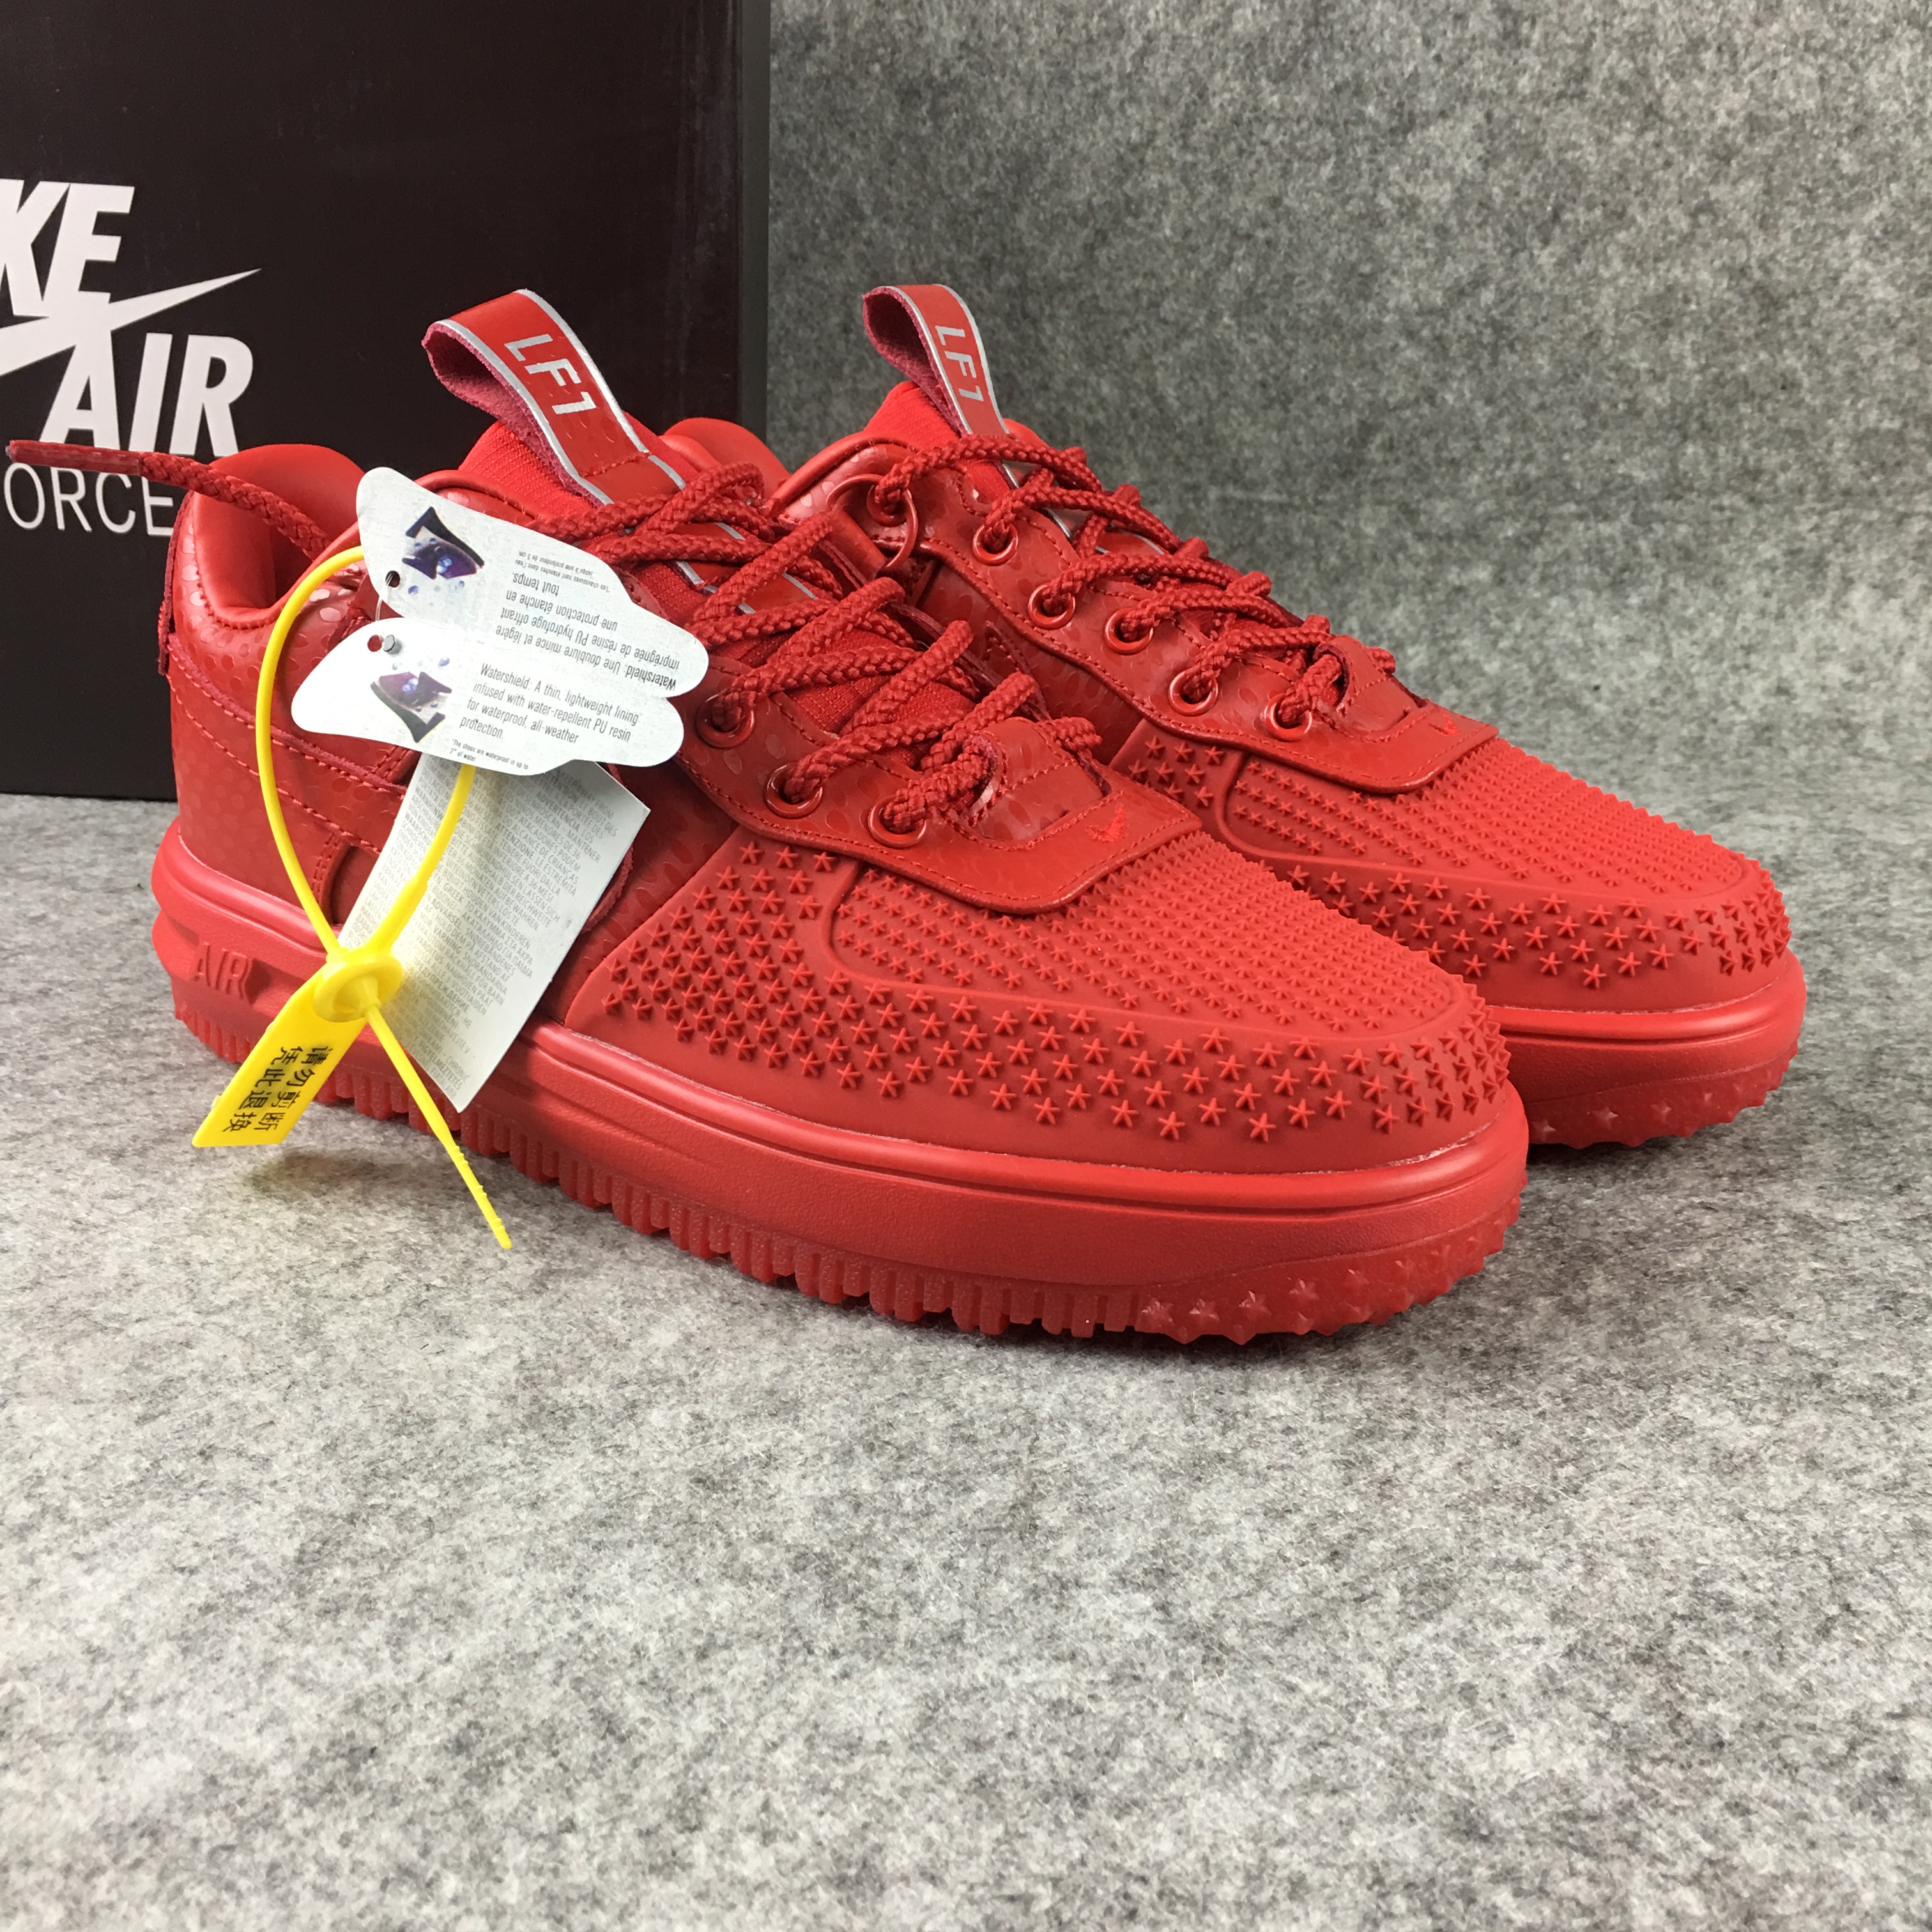 Nike Lunar Force 1 Low All Red Shoes